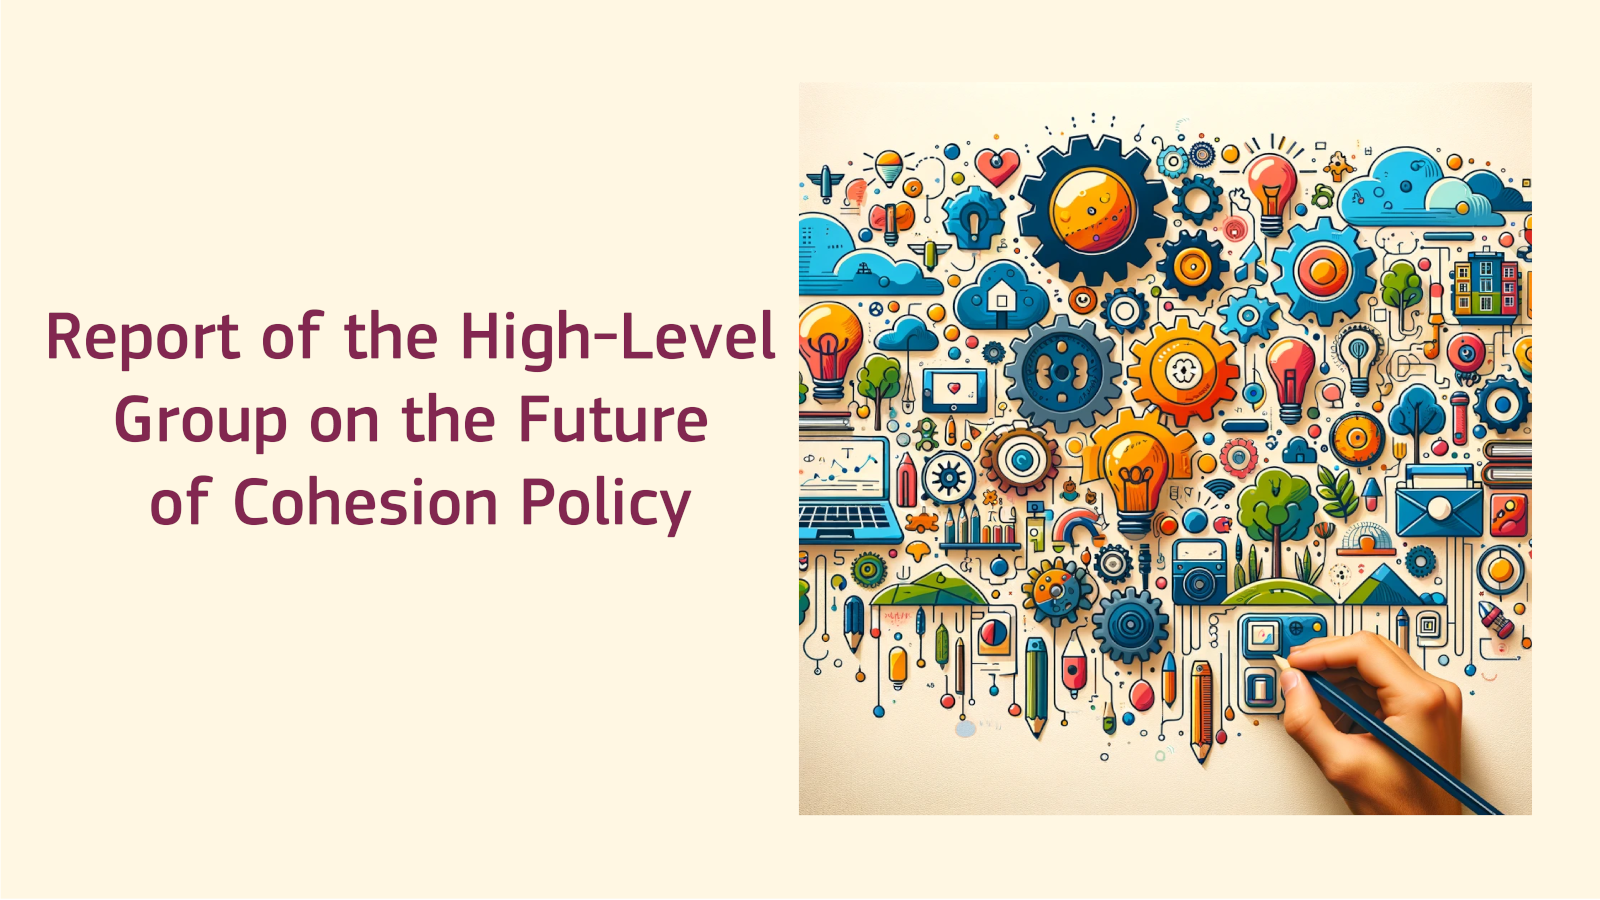 Report from experts on Cohesion Policy proposes ways to maximise the effectiveness and impact of Cohesion Policy in the future